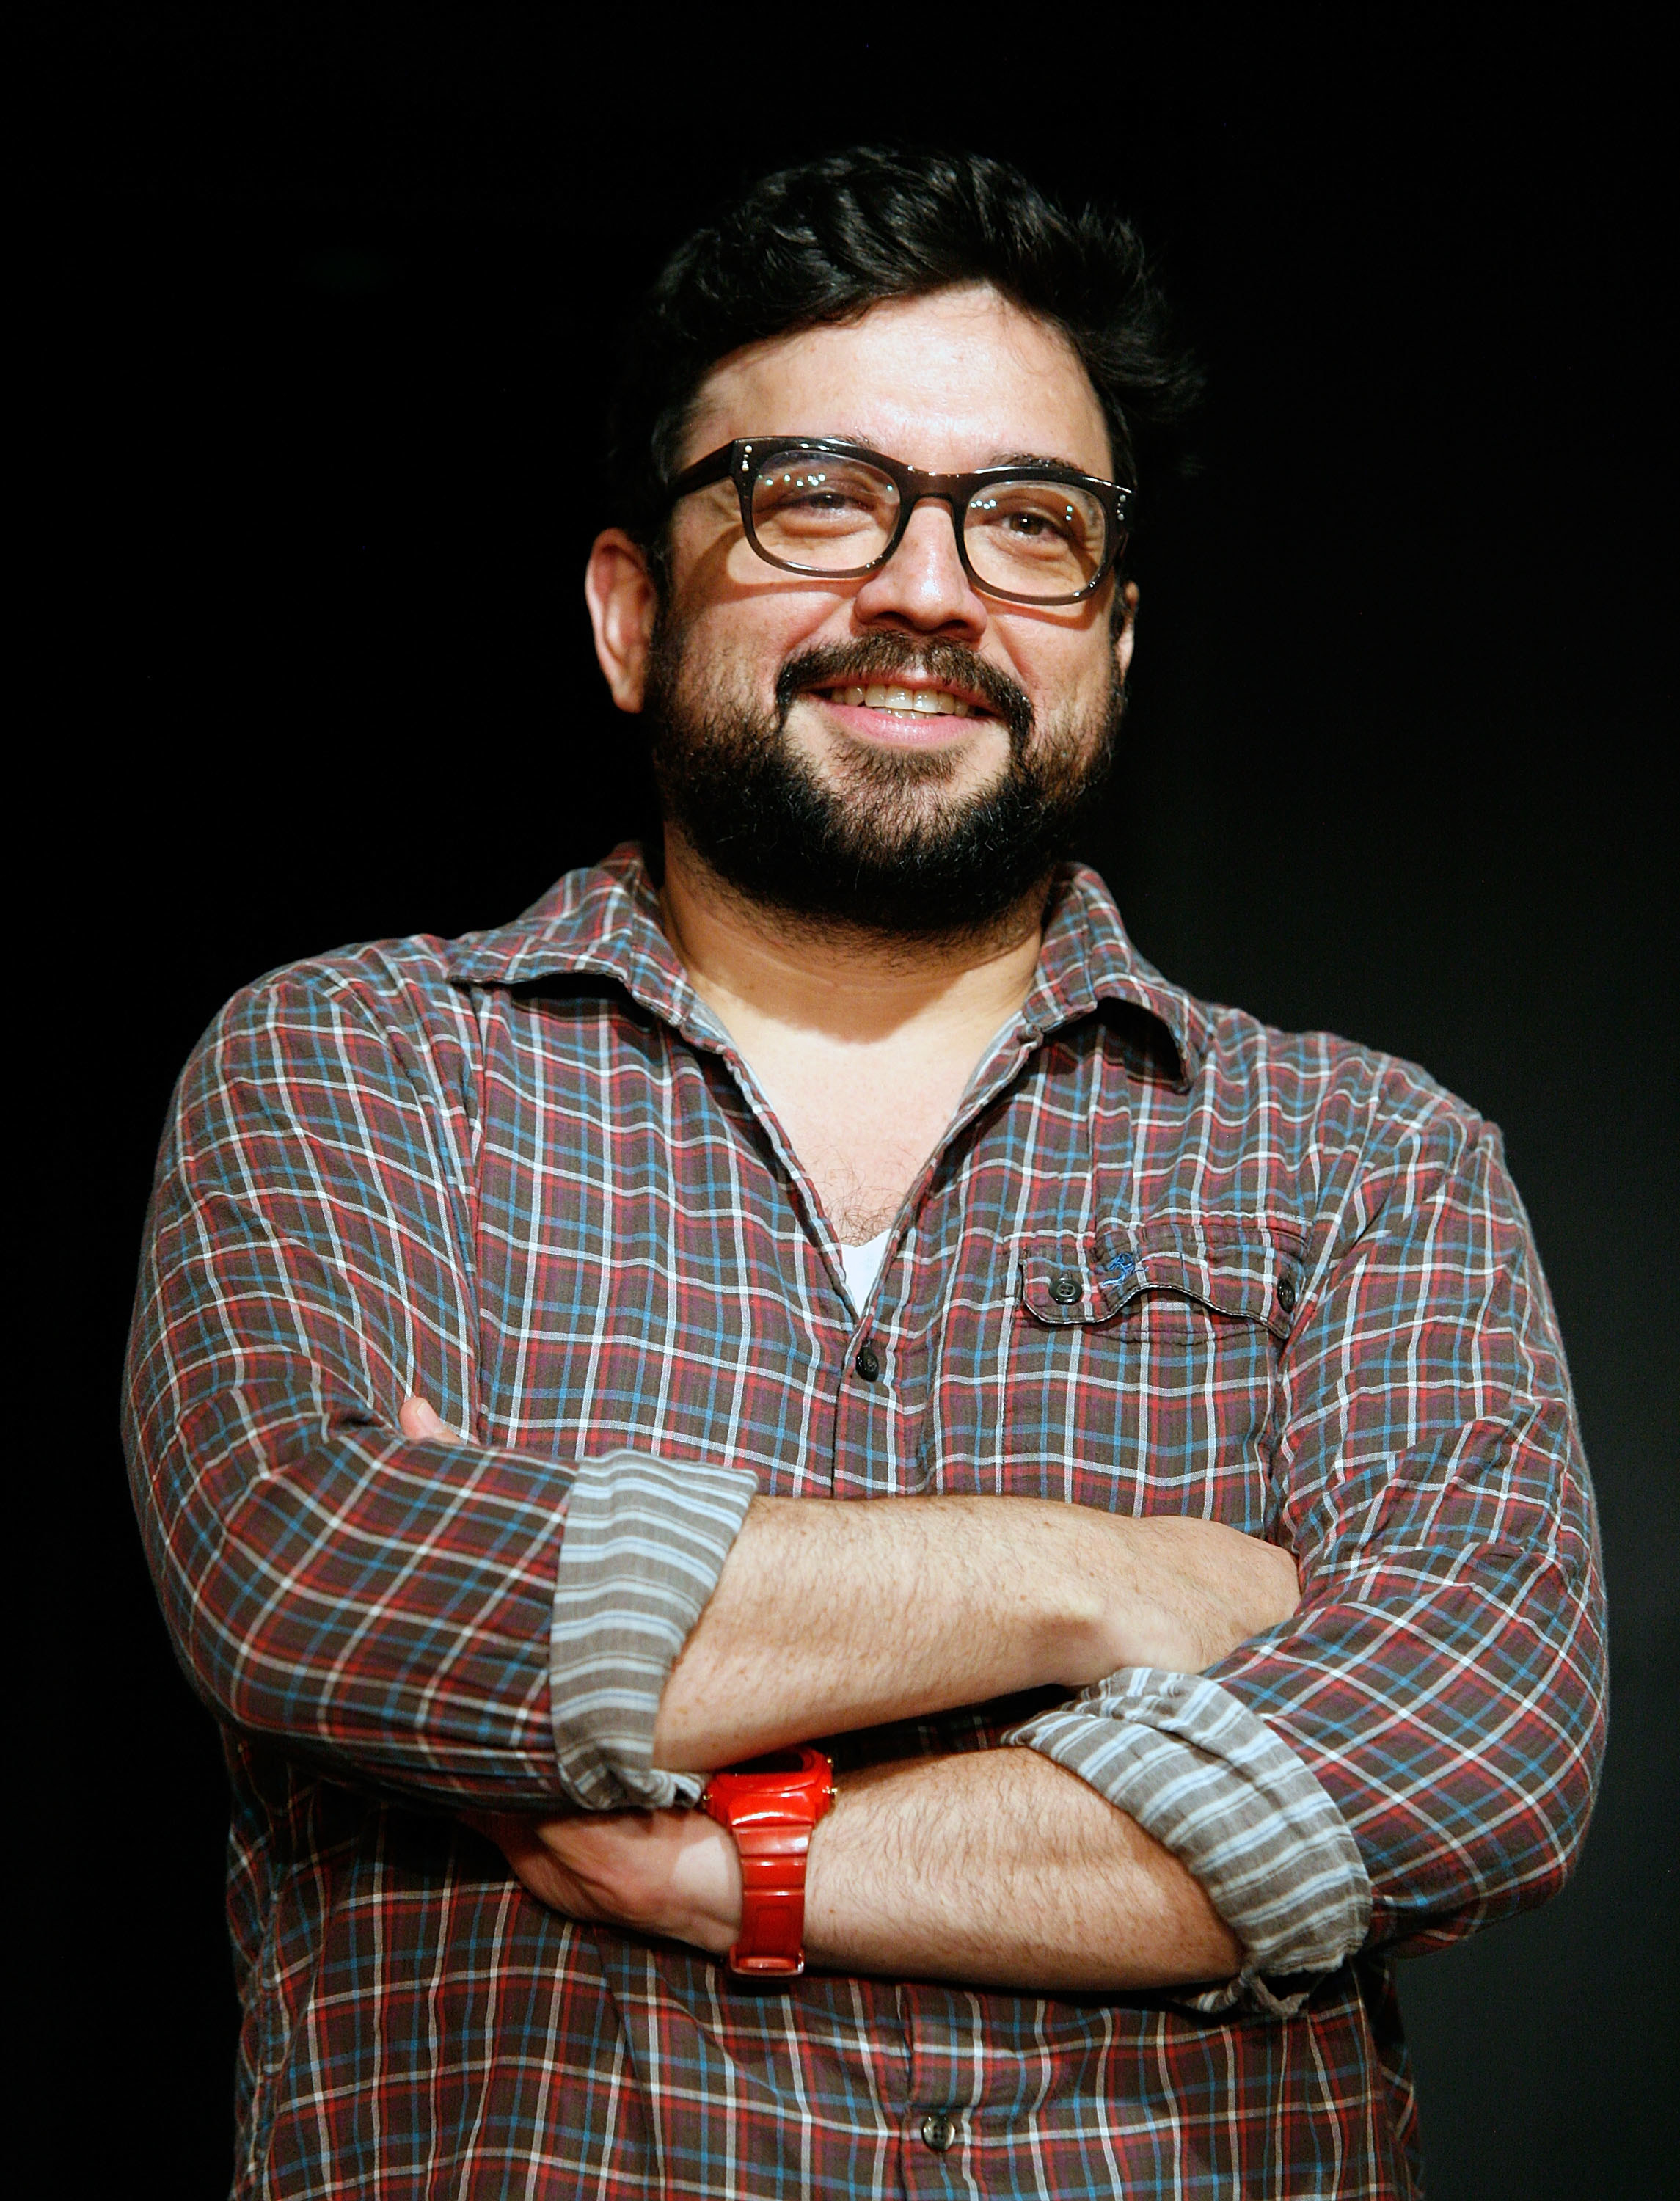 Sanz crosses his arms while wearing a button-down shirt